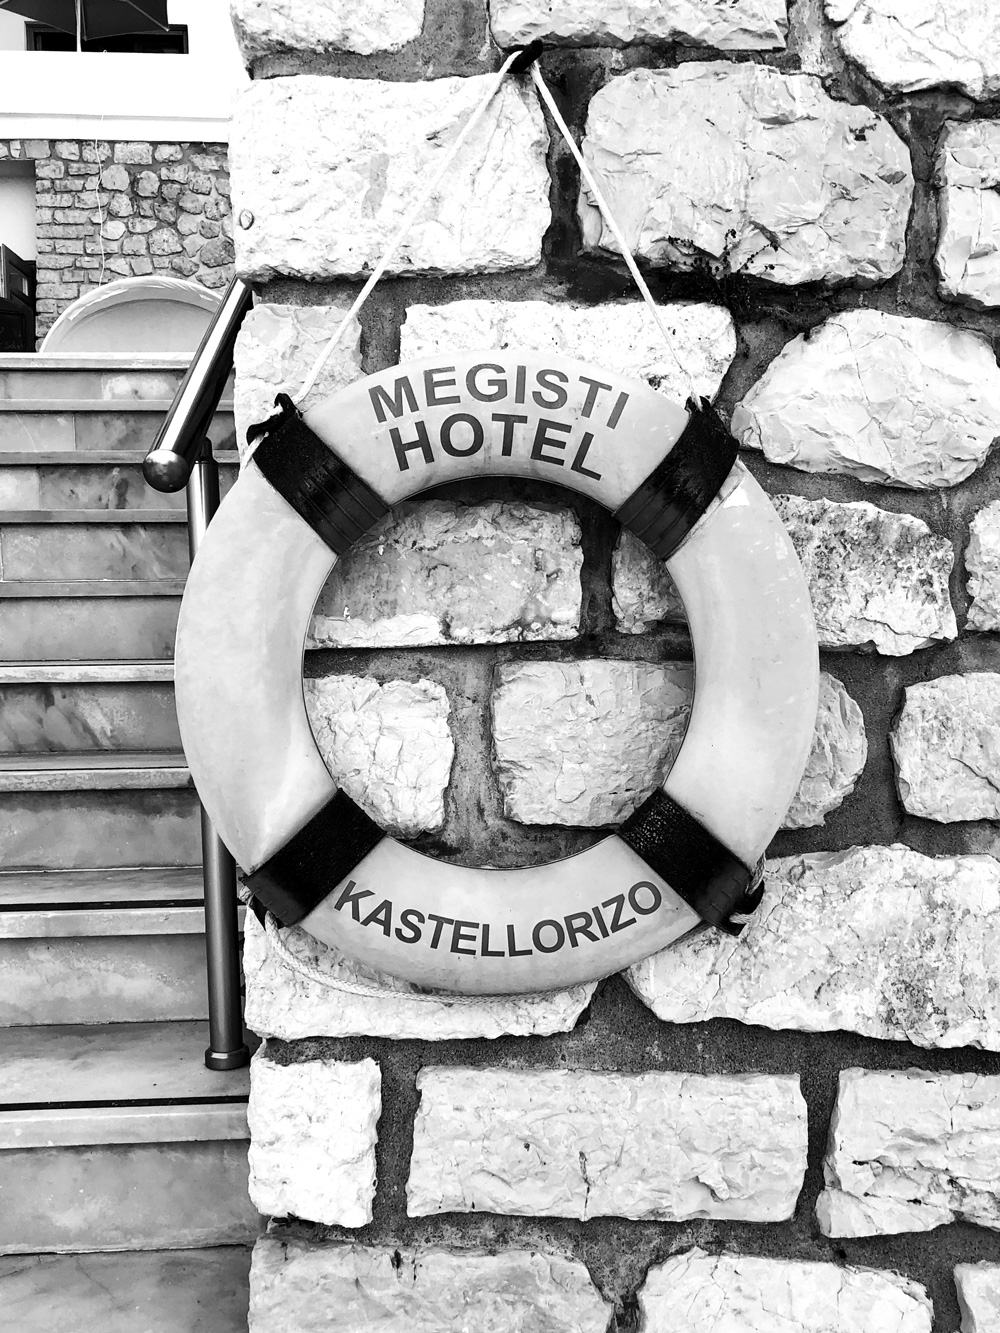 A black and white image of a round buoy hanging off a stone wall at Megisti Hotel that reads “Megisti Hotel Kastellorizo” 